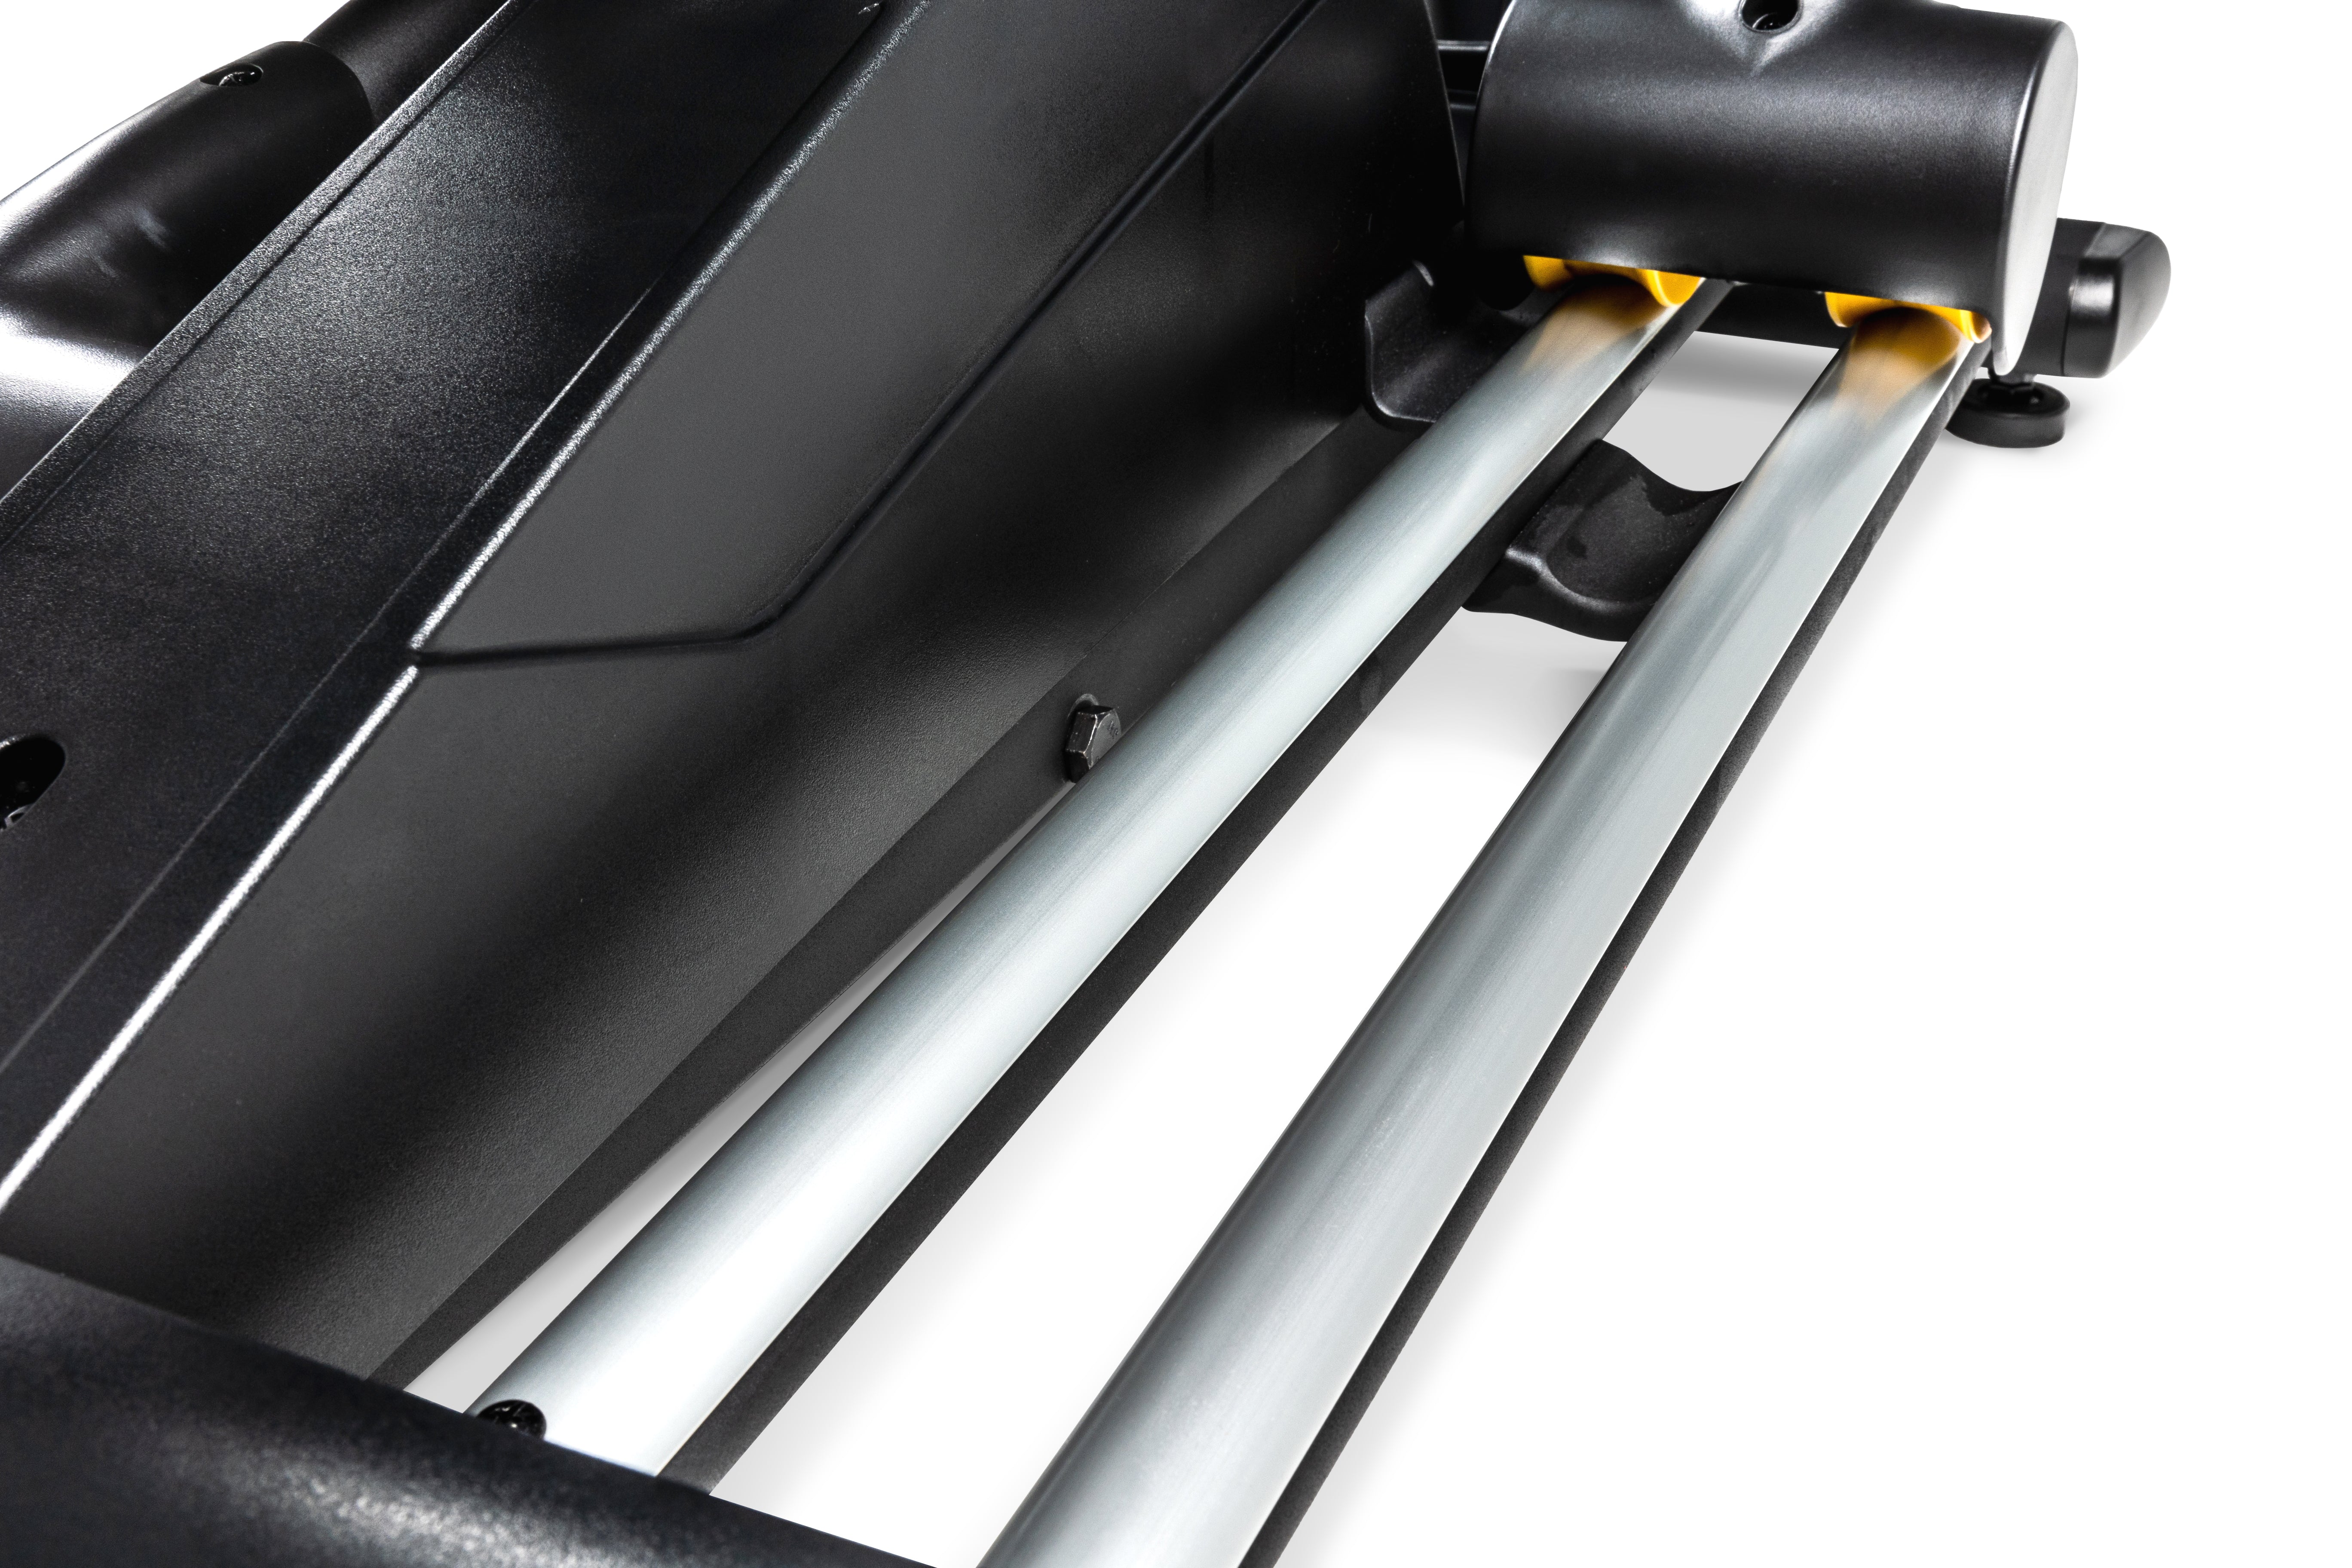 Close-up view of the Sole E35 elliptical's sleek black base and silver railings, showcasing its durable build and precision-engineered parts, including a hint of a yellow accent.